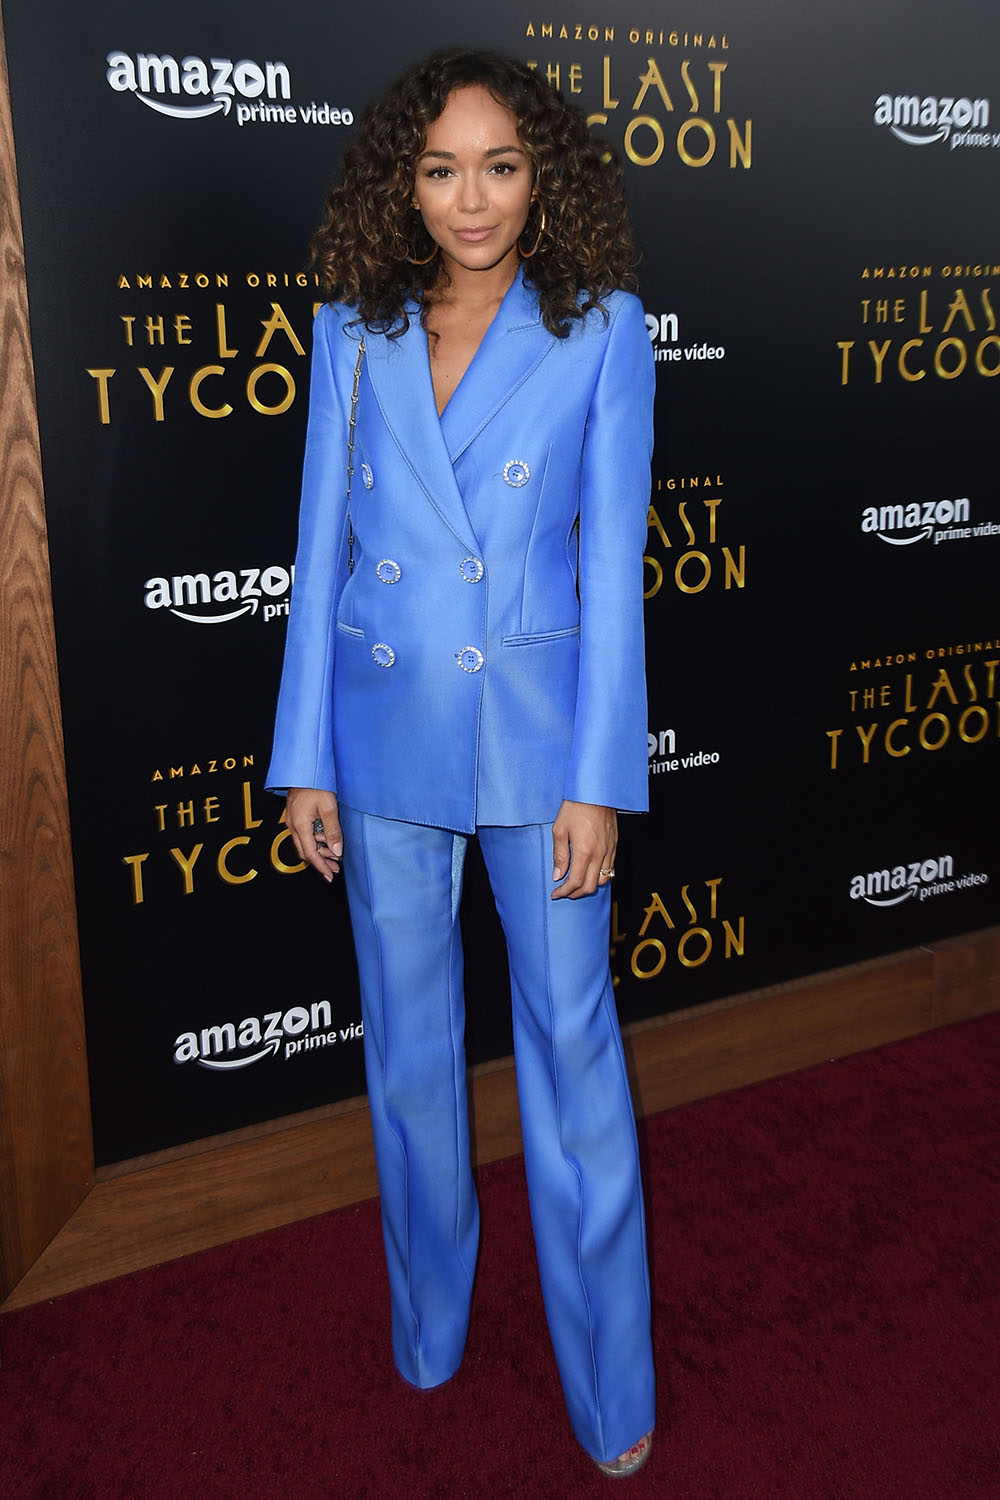 Ashley Madekwe arrives at the premiere of 'The Last Tycoon' - and stands out from the crowd in this incredible blue suit.